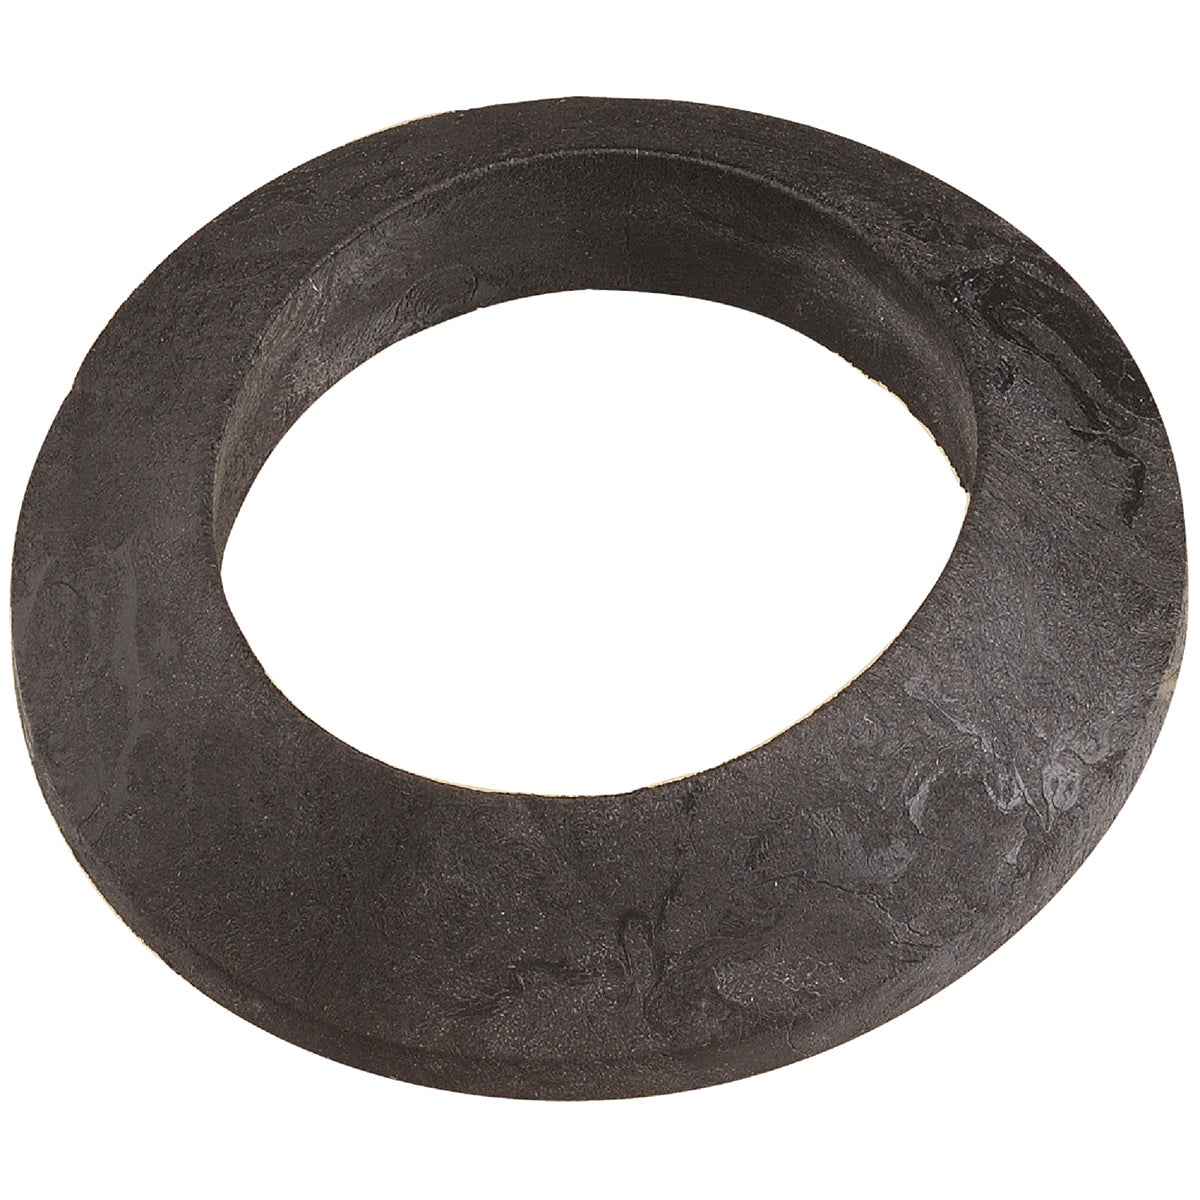 Item 414518, Fits between toilet tank and bowl for a tight seal. Sponge rubber.